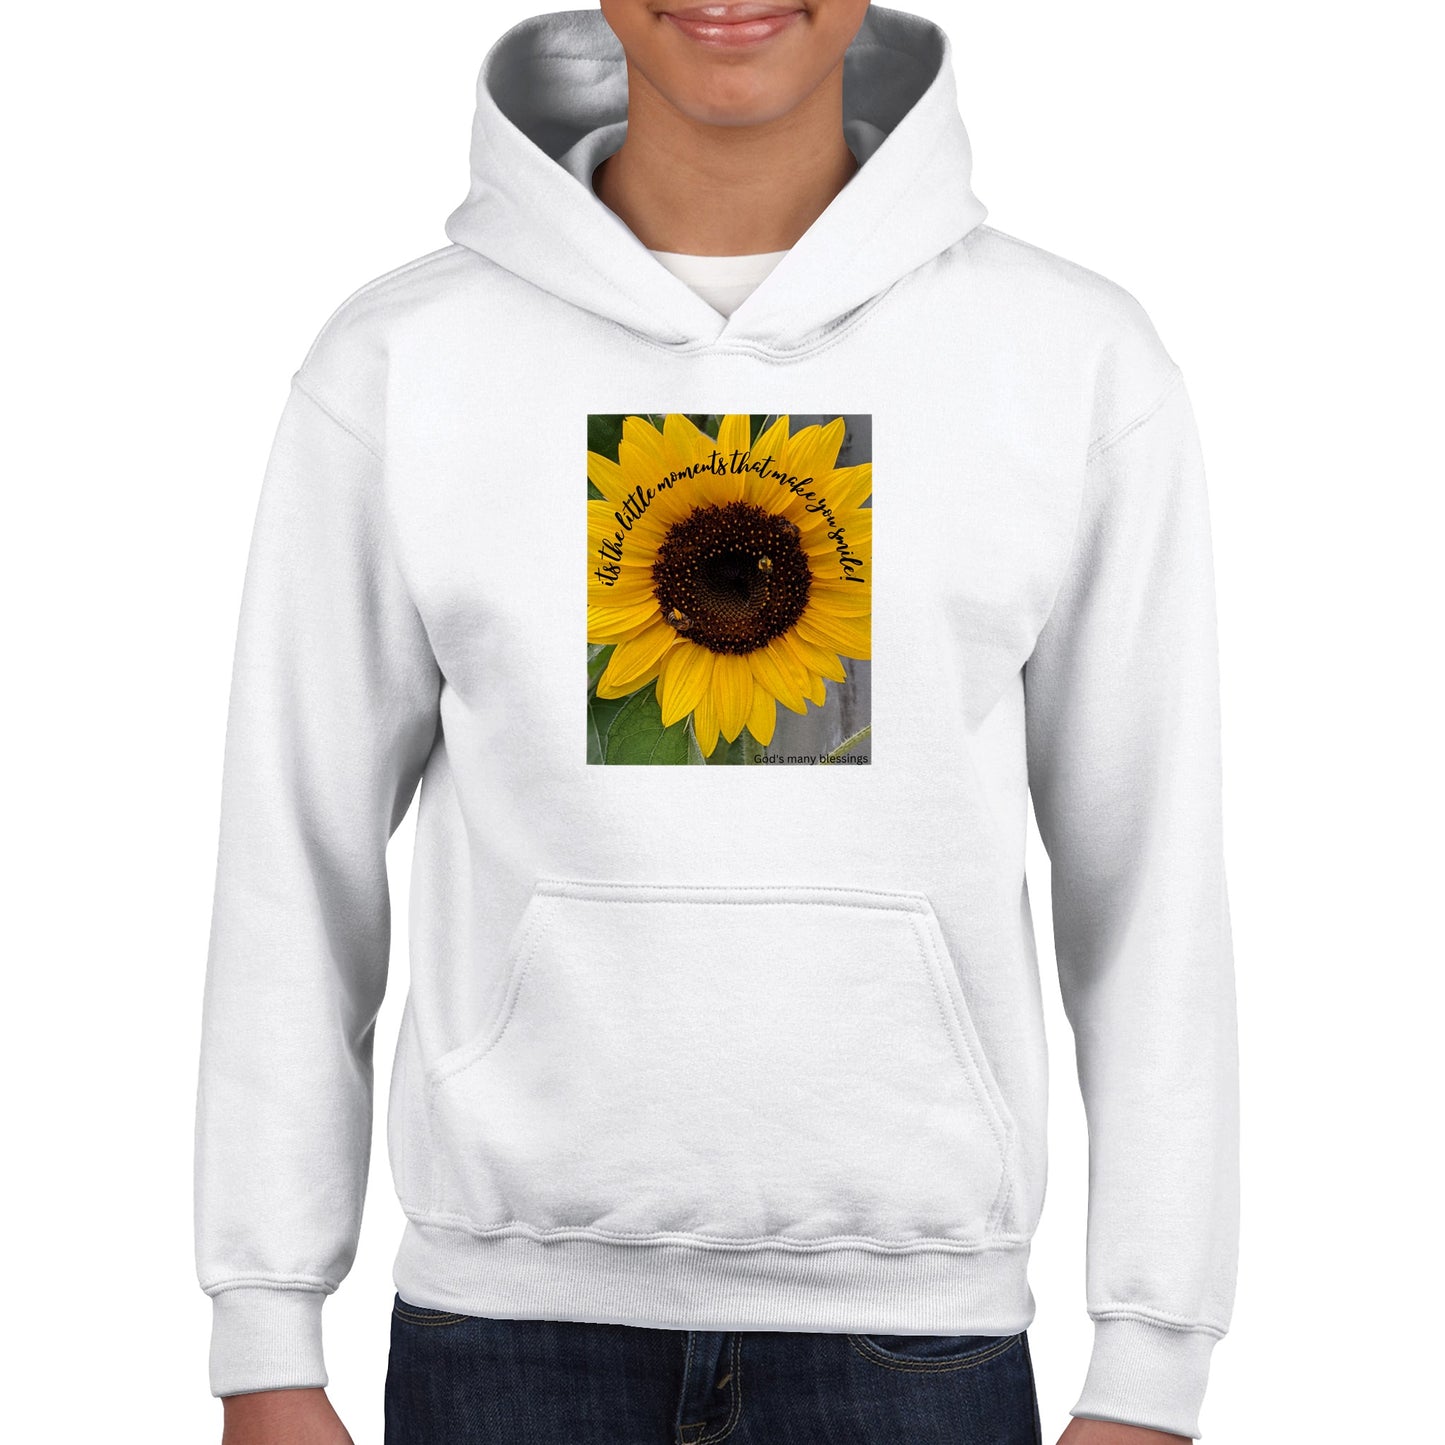 Brighten your day with a sunflower smile Classic Kids Pullover Hoodie